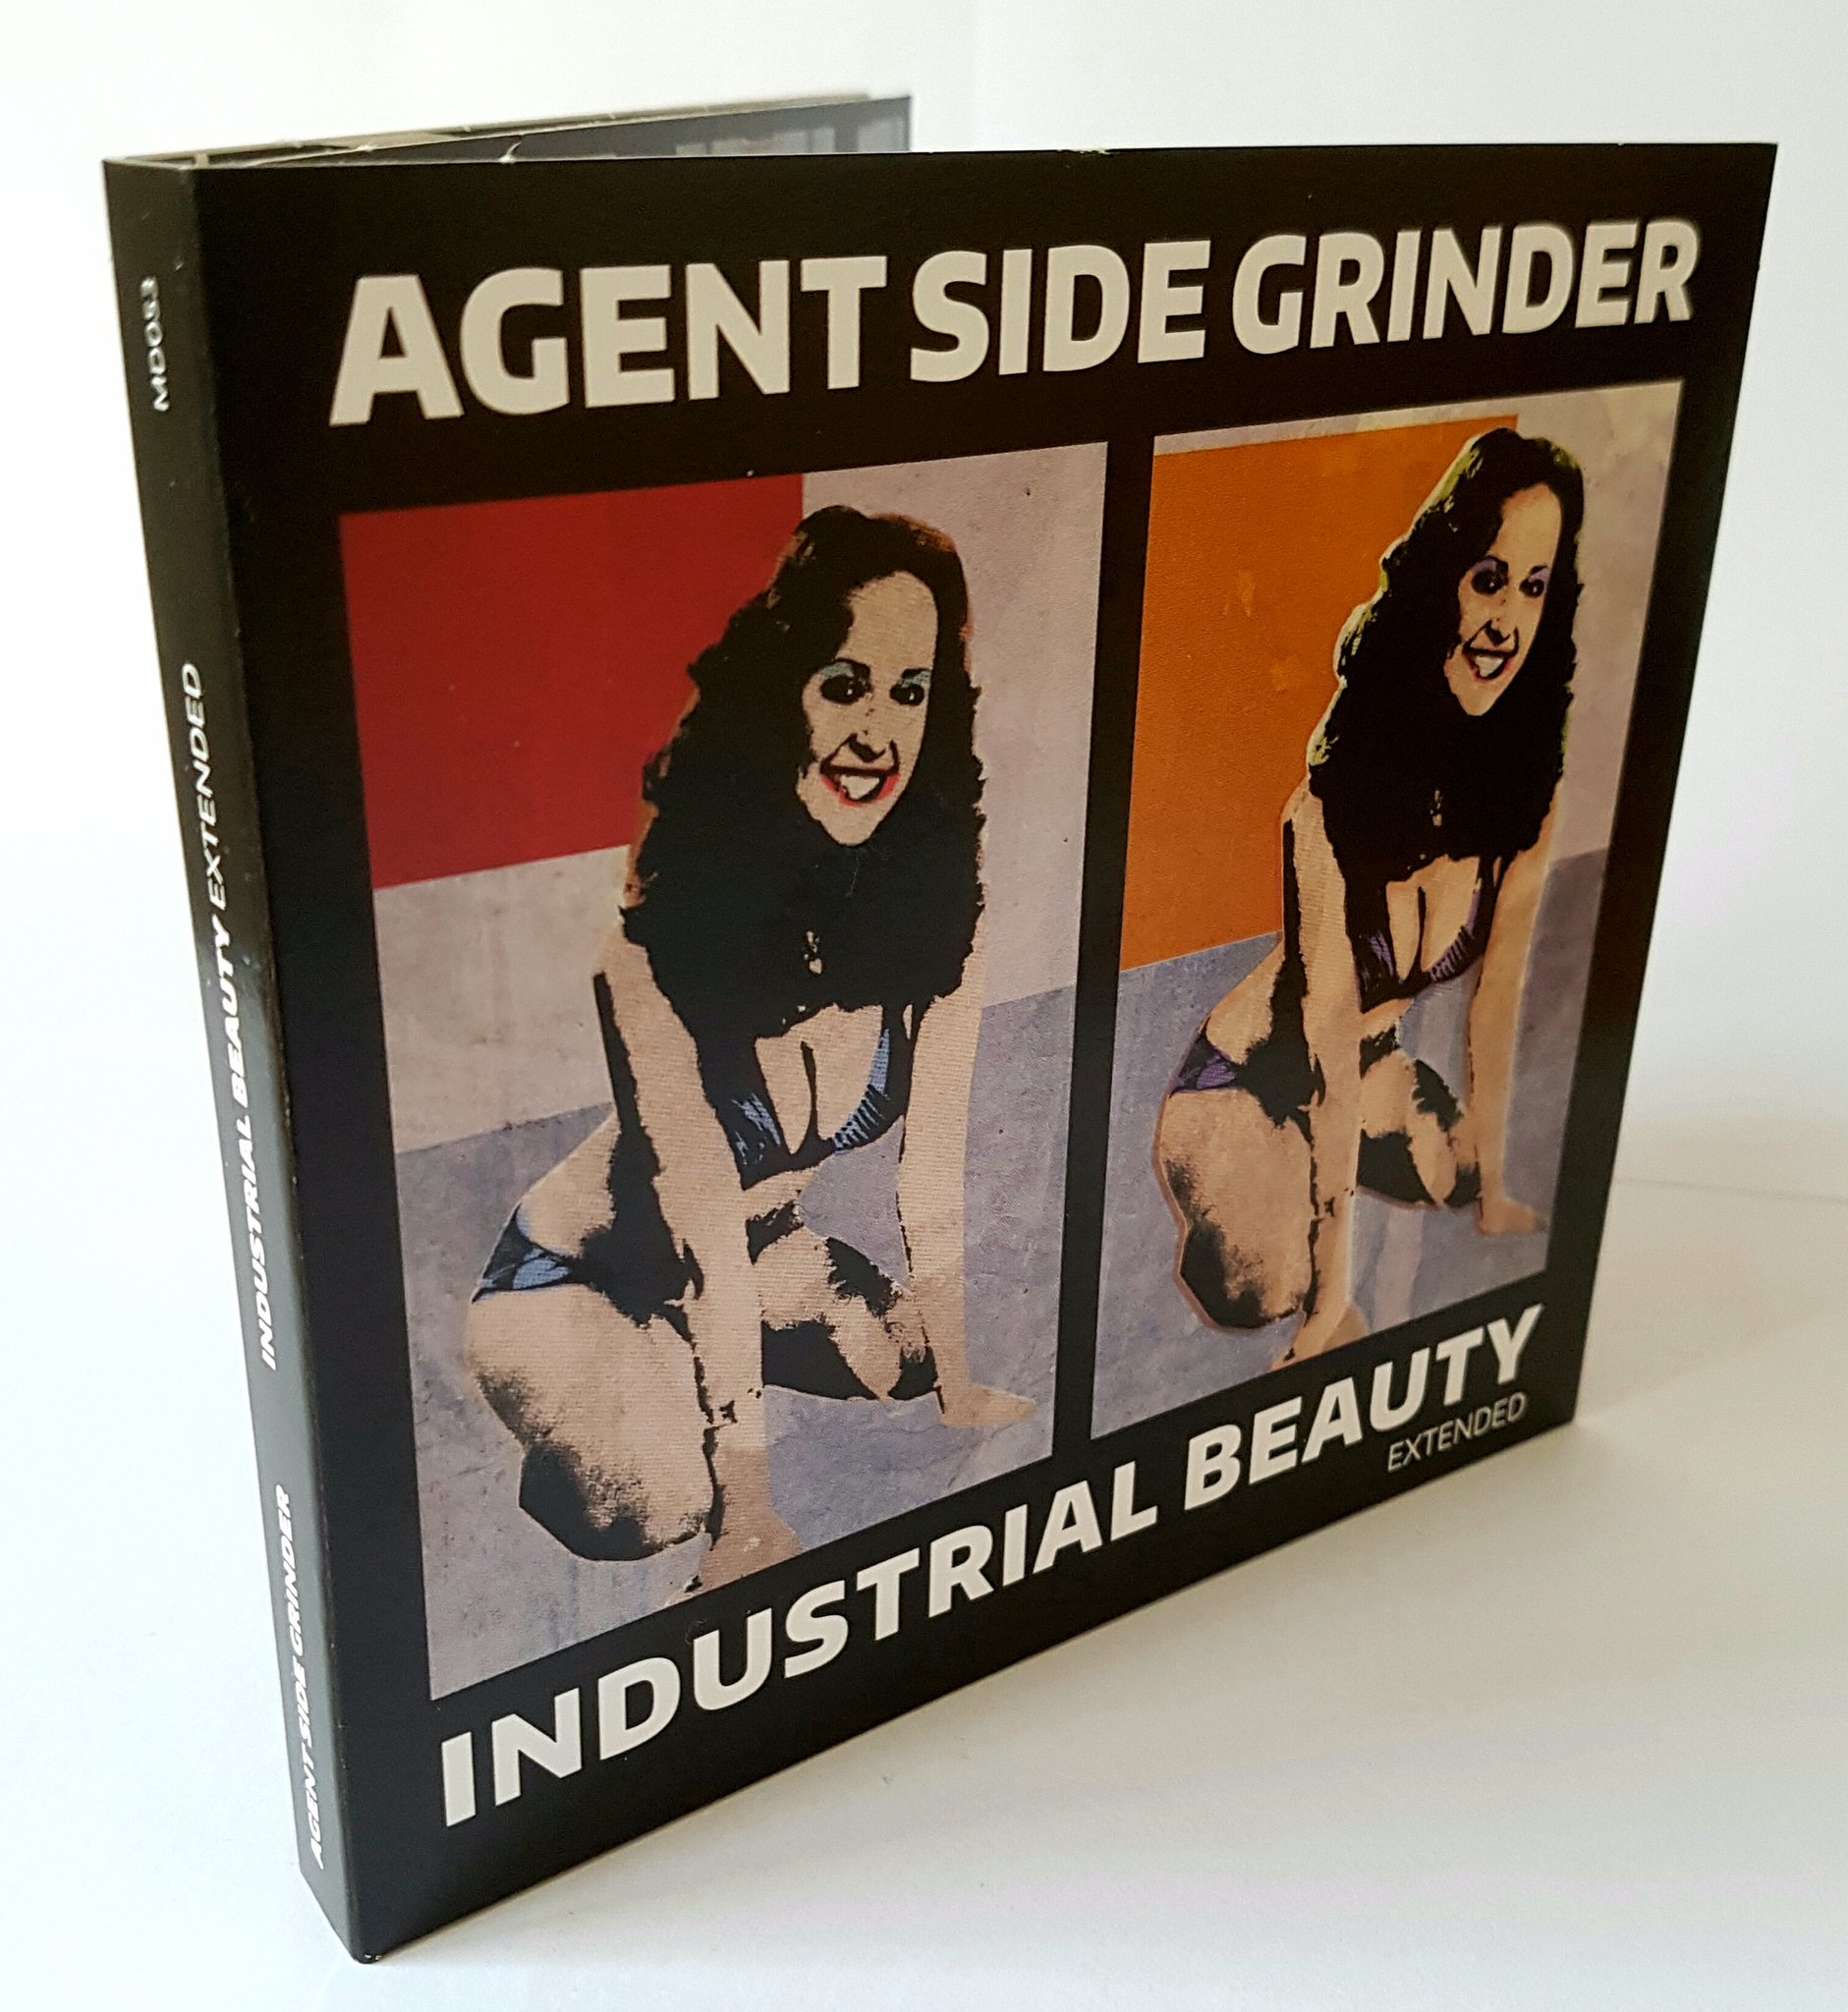 Agent Side Grinder "Industrial Beauty extended"